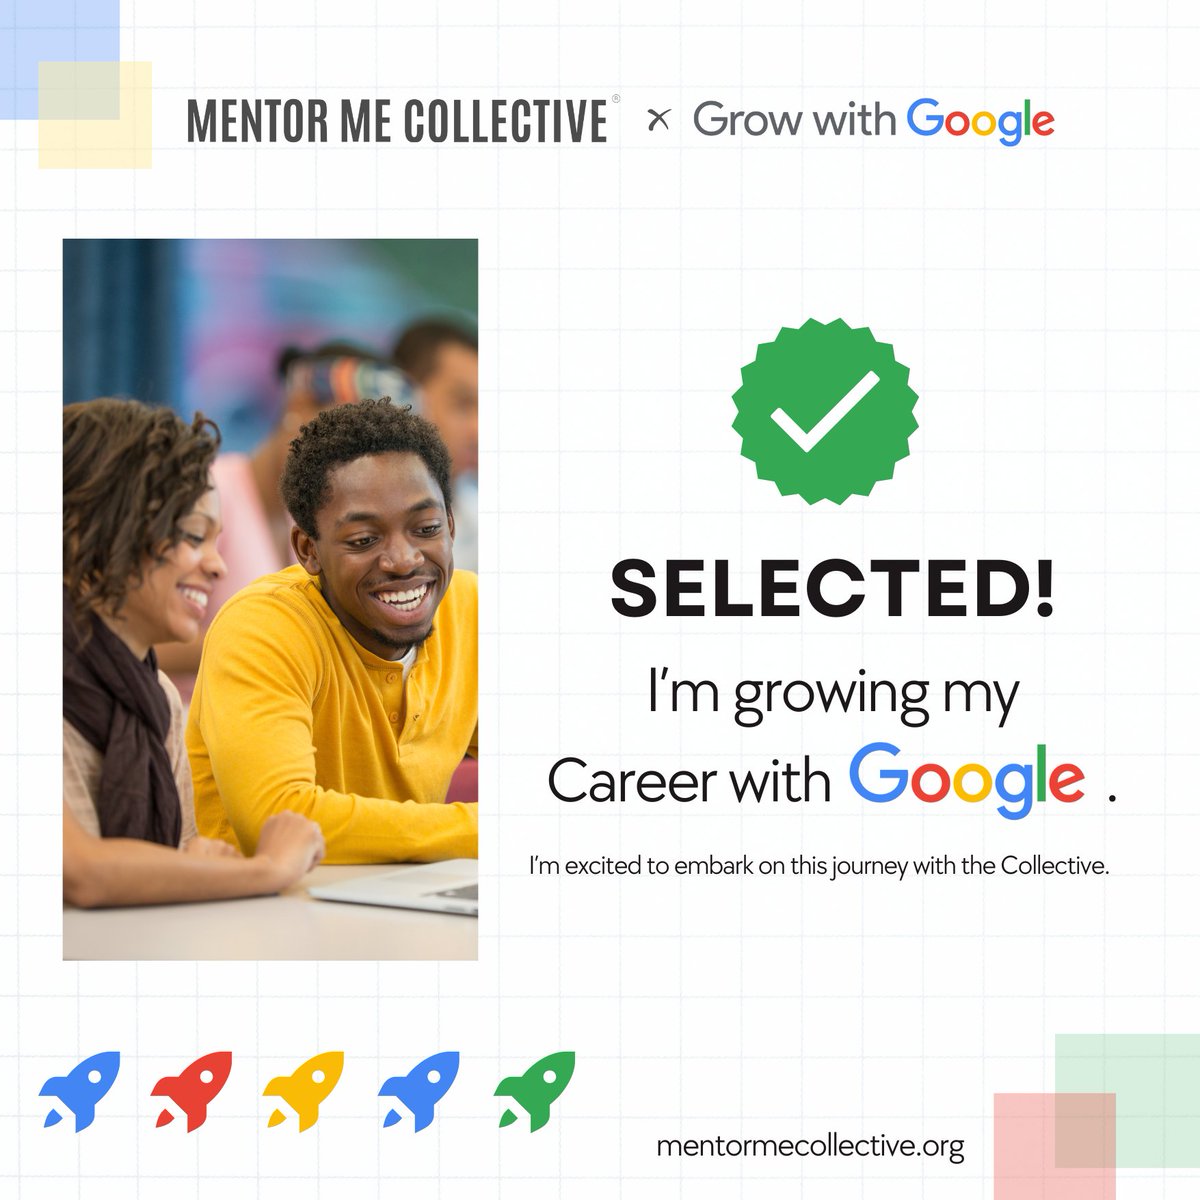 I was accepted!! Thank you to the Mentor Me Collective for this great opportunity to #GrowWithGoogle! 🥳

And thank you to @teneikaask_you for sharing this😭💙